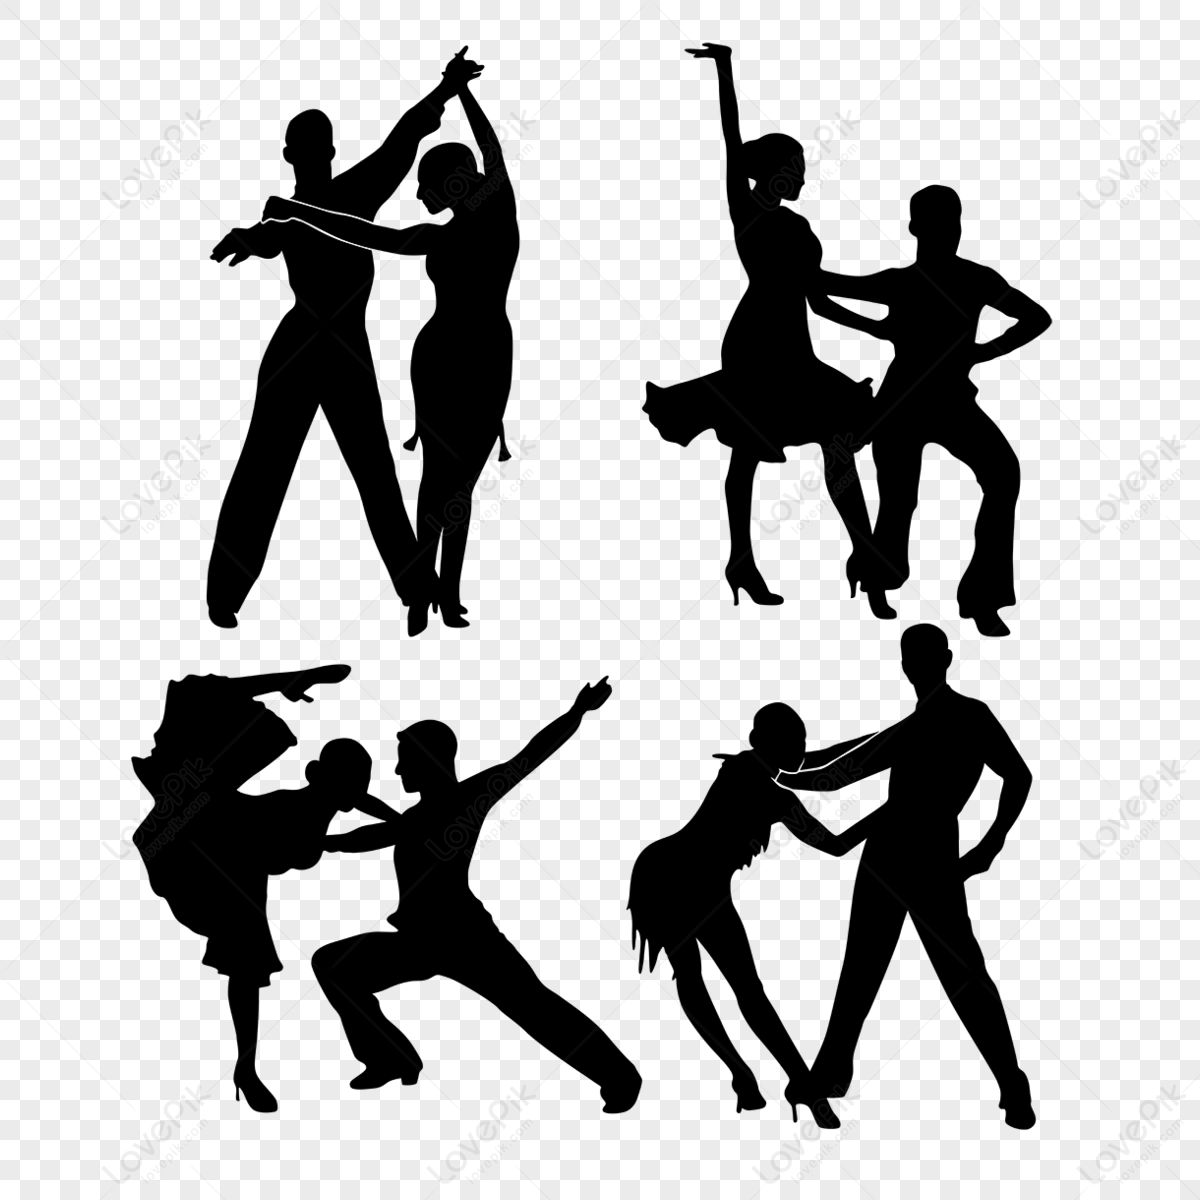 Silhouette of a Male Dance Performer in Action Pose. Stock Vector -  Illustration of slim, healthy: 273820986